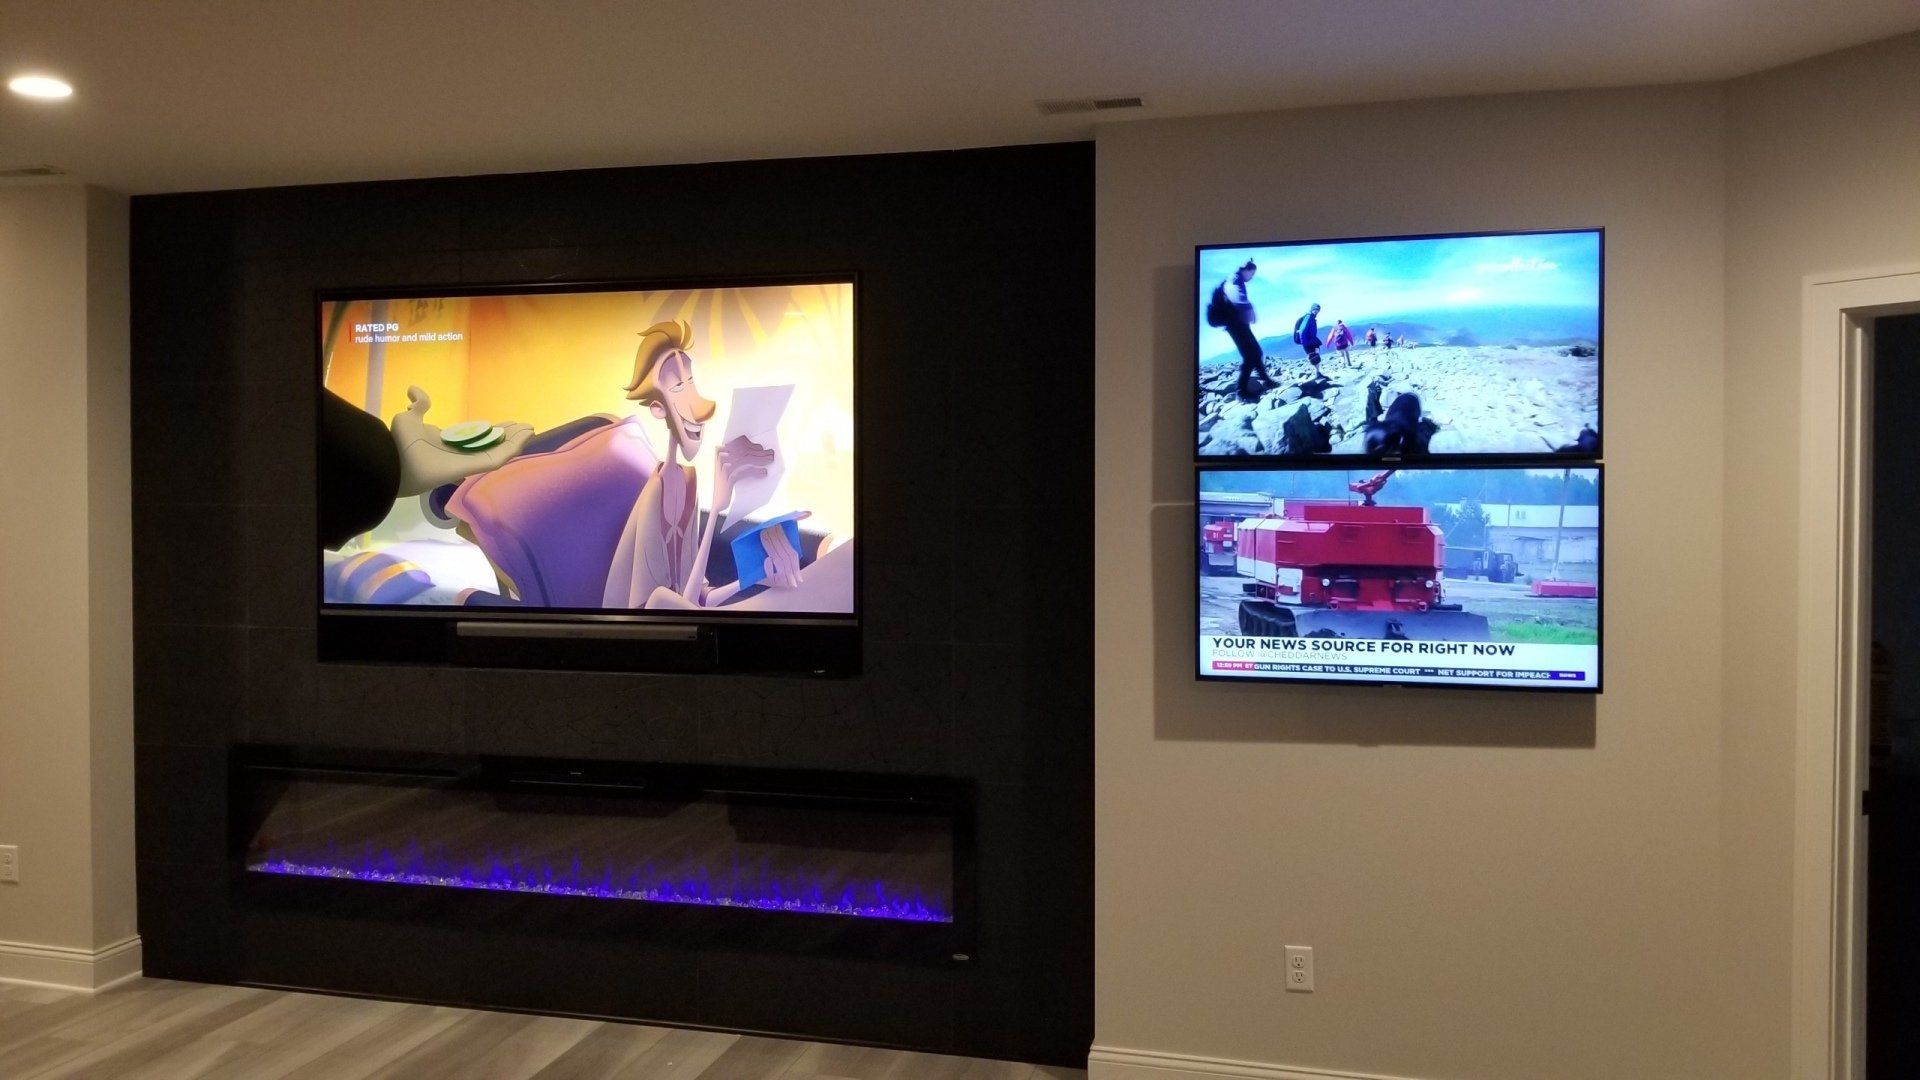 three televisions are mounted on a wall with installation by fisher electronics in northern ohio